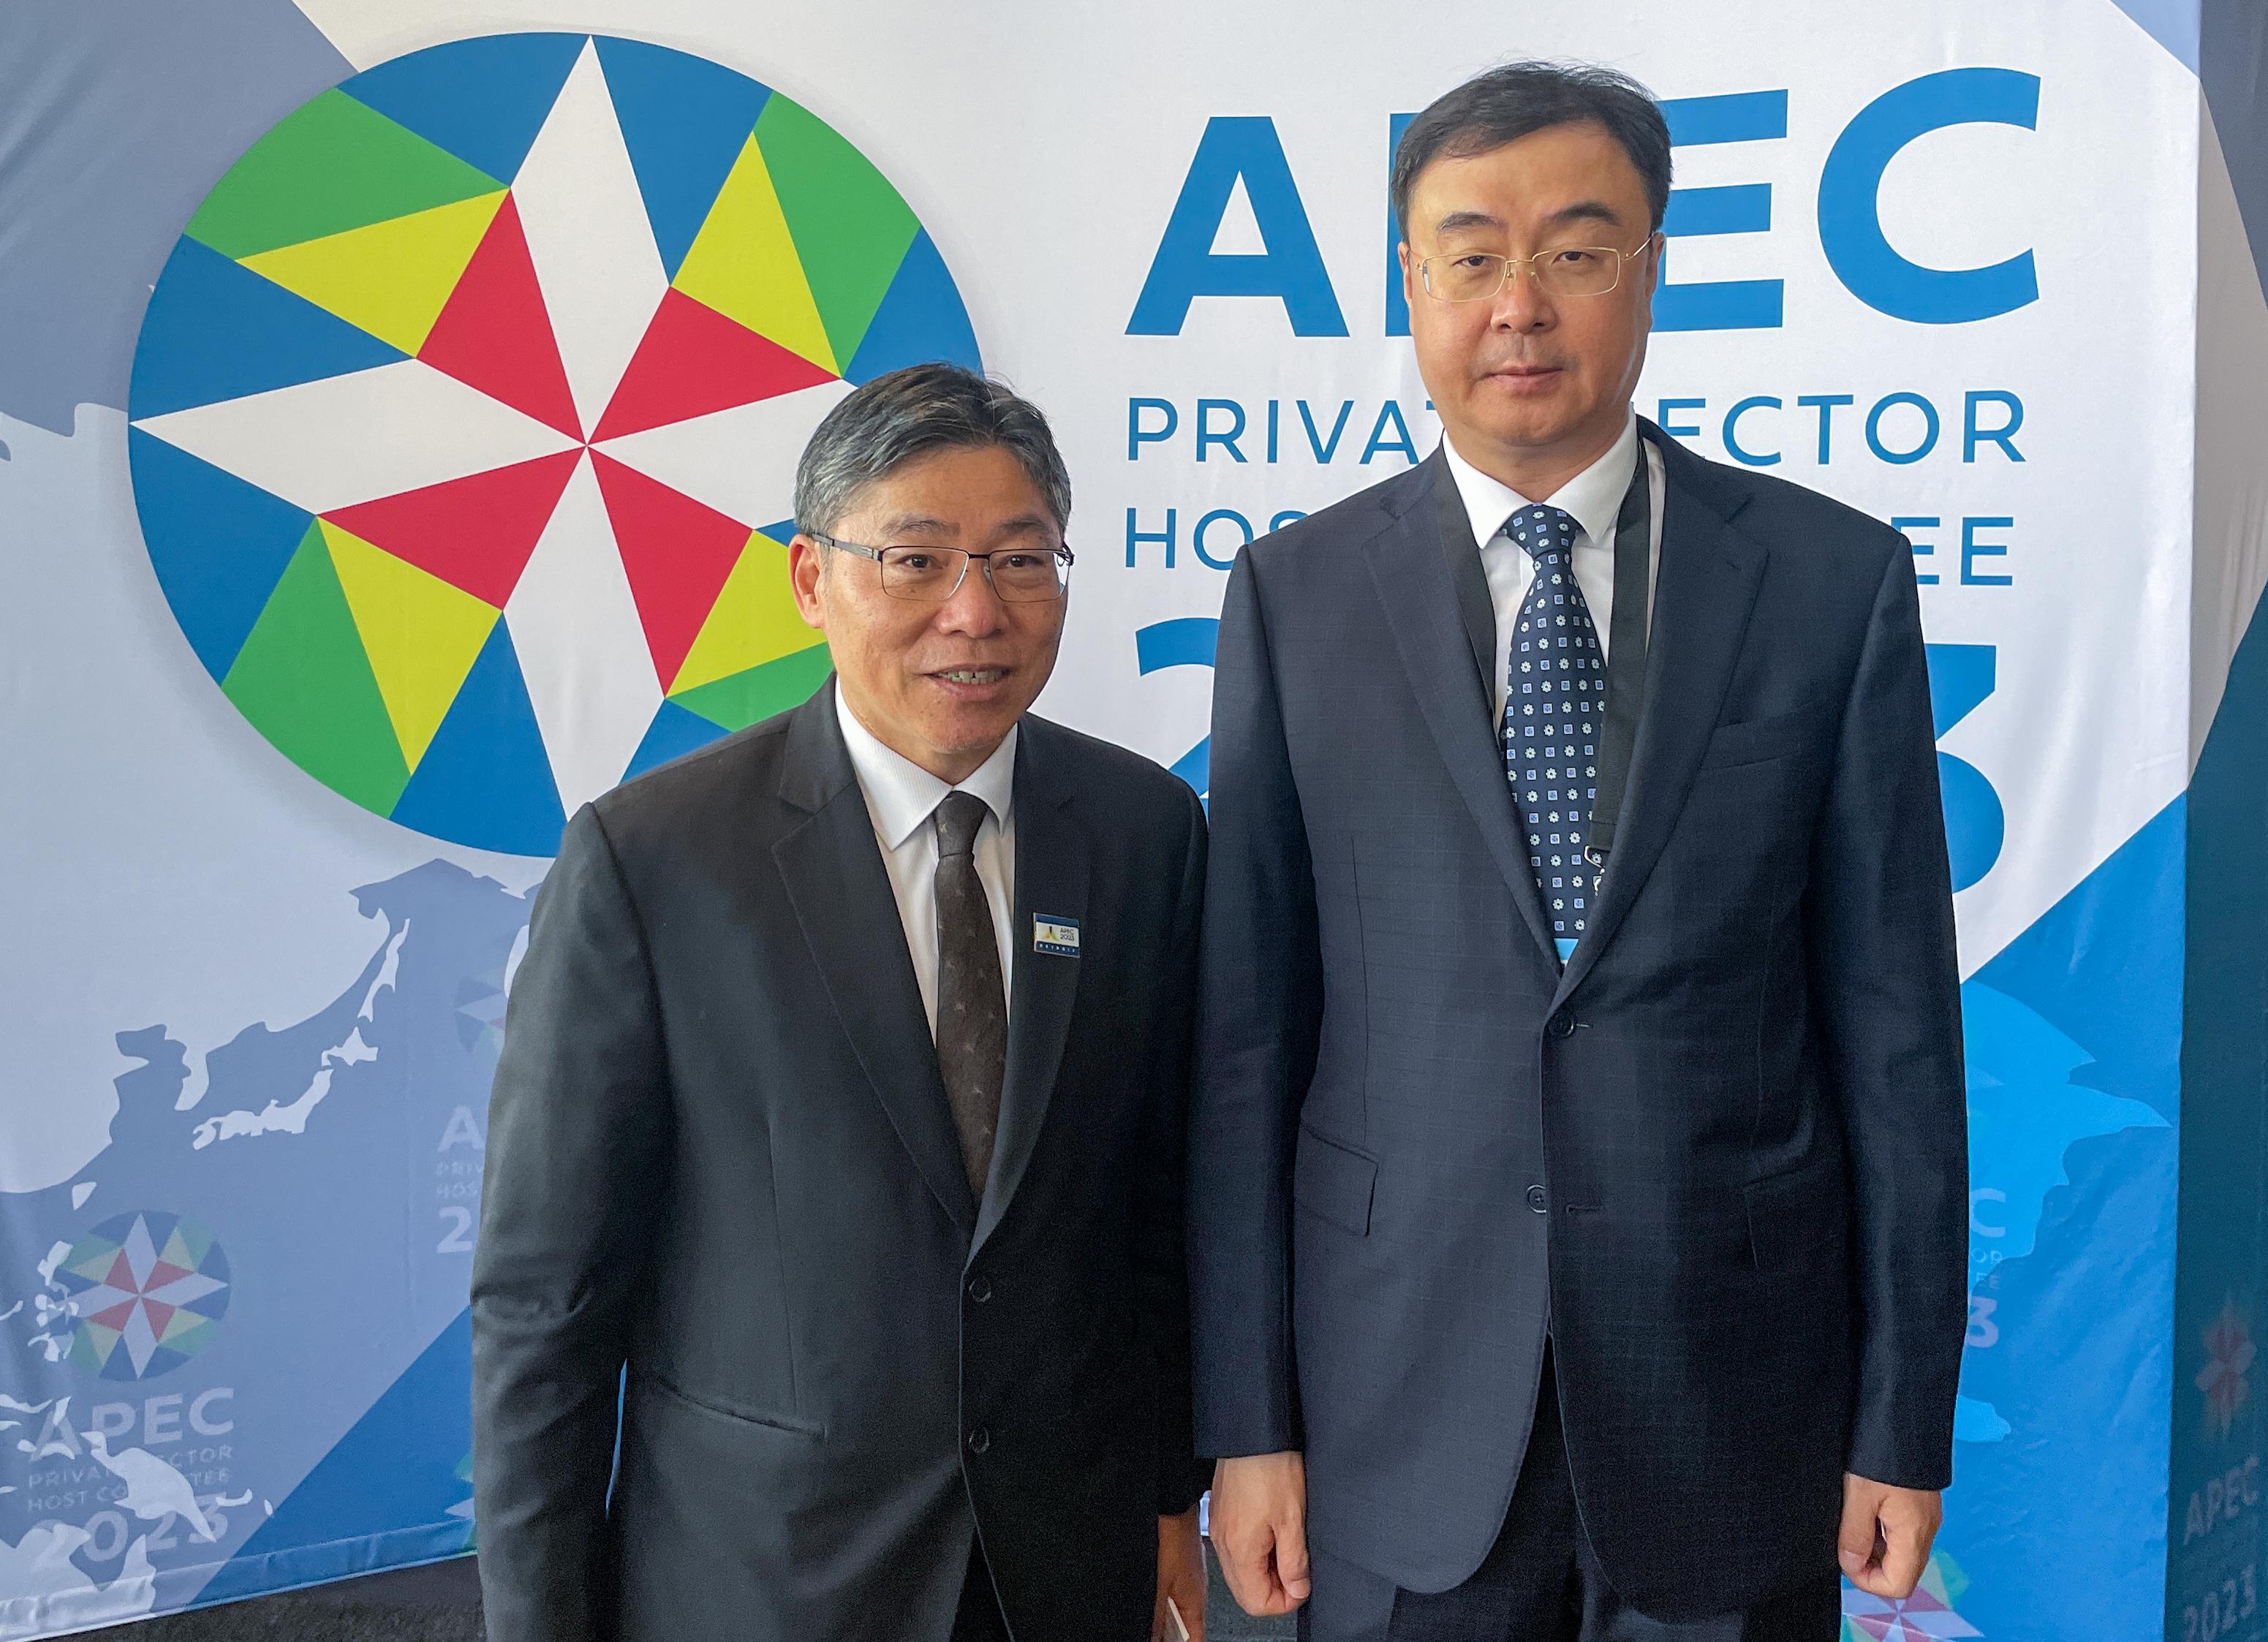 The Secretary for Transport and Logistics, Mr Lam Sai-hung, attended the 11th Asia-Pacific Economic Cooperation  Transportation Ministerial Meeting, in Detroit, the United States (US), from May 15 to 17 (US time). During his stay, Mr Lam met with a number of representatives from other APEC member economies to exchange views on strengthening co-operation in the field of transportation. Photo shows Mr Lam (left) meeting Vice Minister of Transport Mr Wang Gang (right) on May 15 (US time).